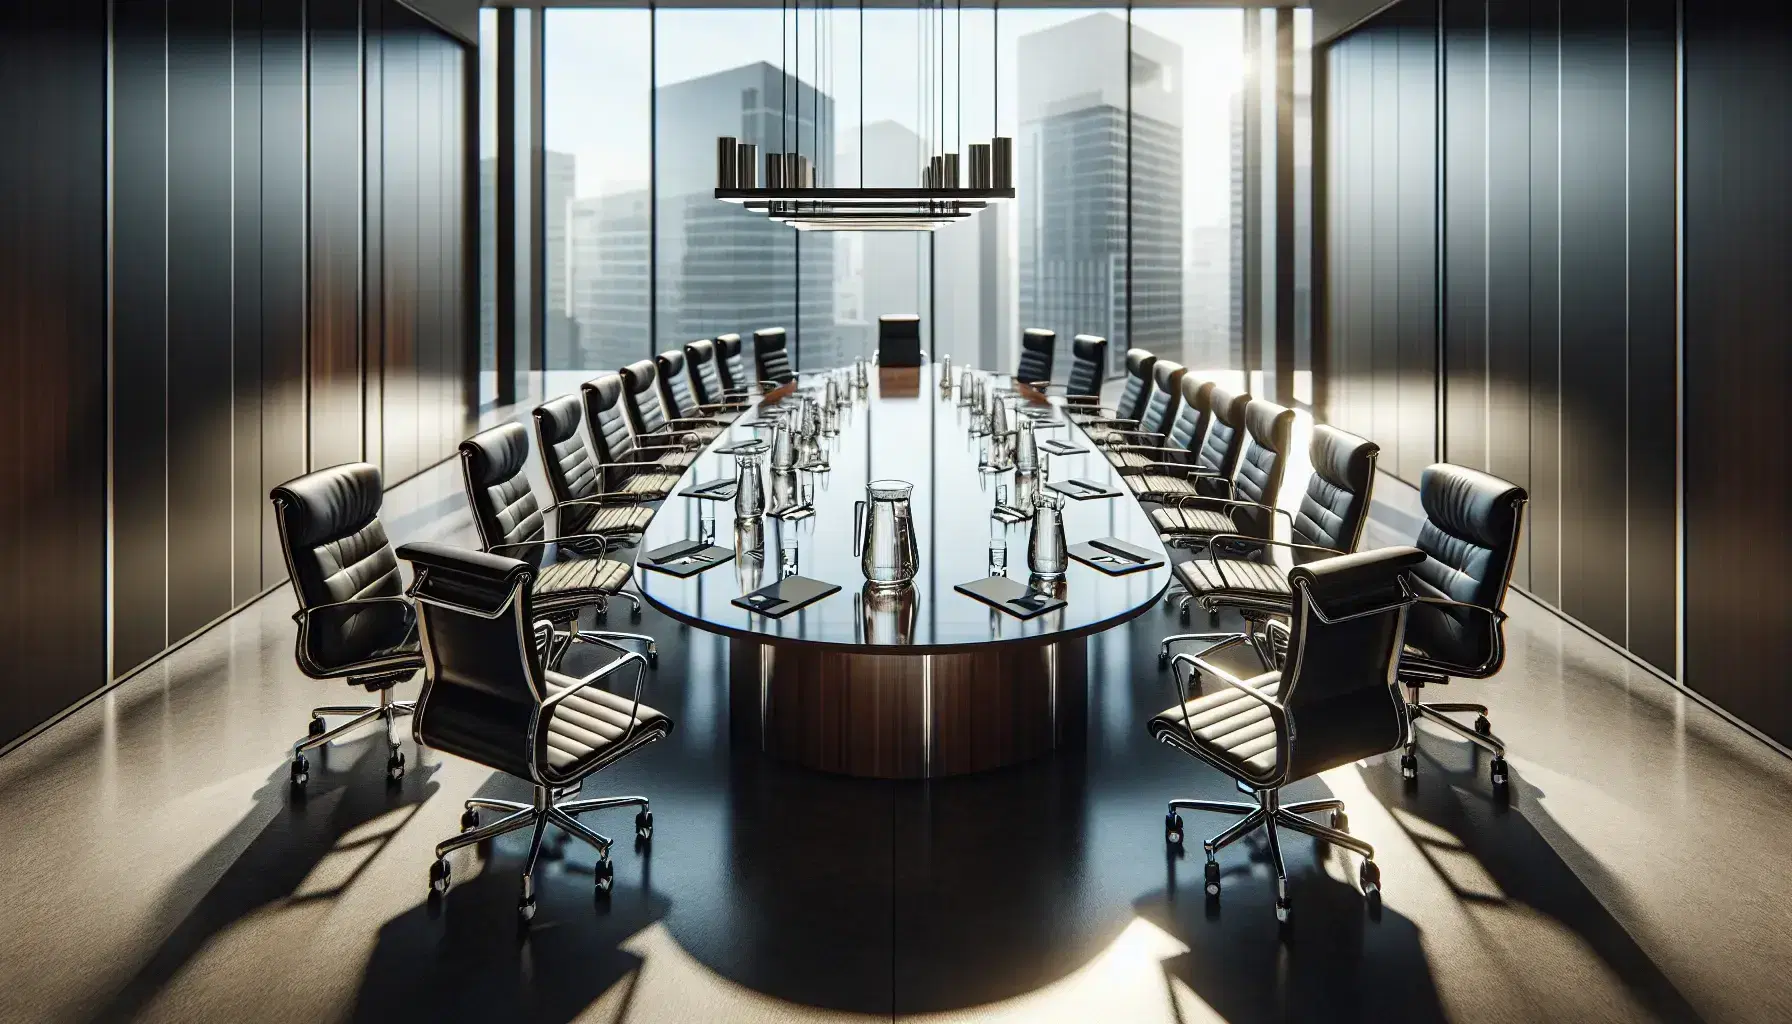 Modern boardroom with oval wooden table, black leather chairs, digital tablets, glass water pitchers, and a city skyline view through floor-to-ceiling windows.